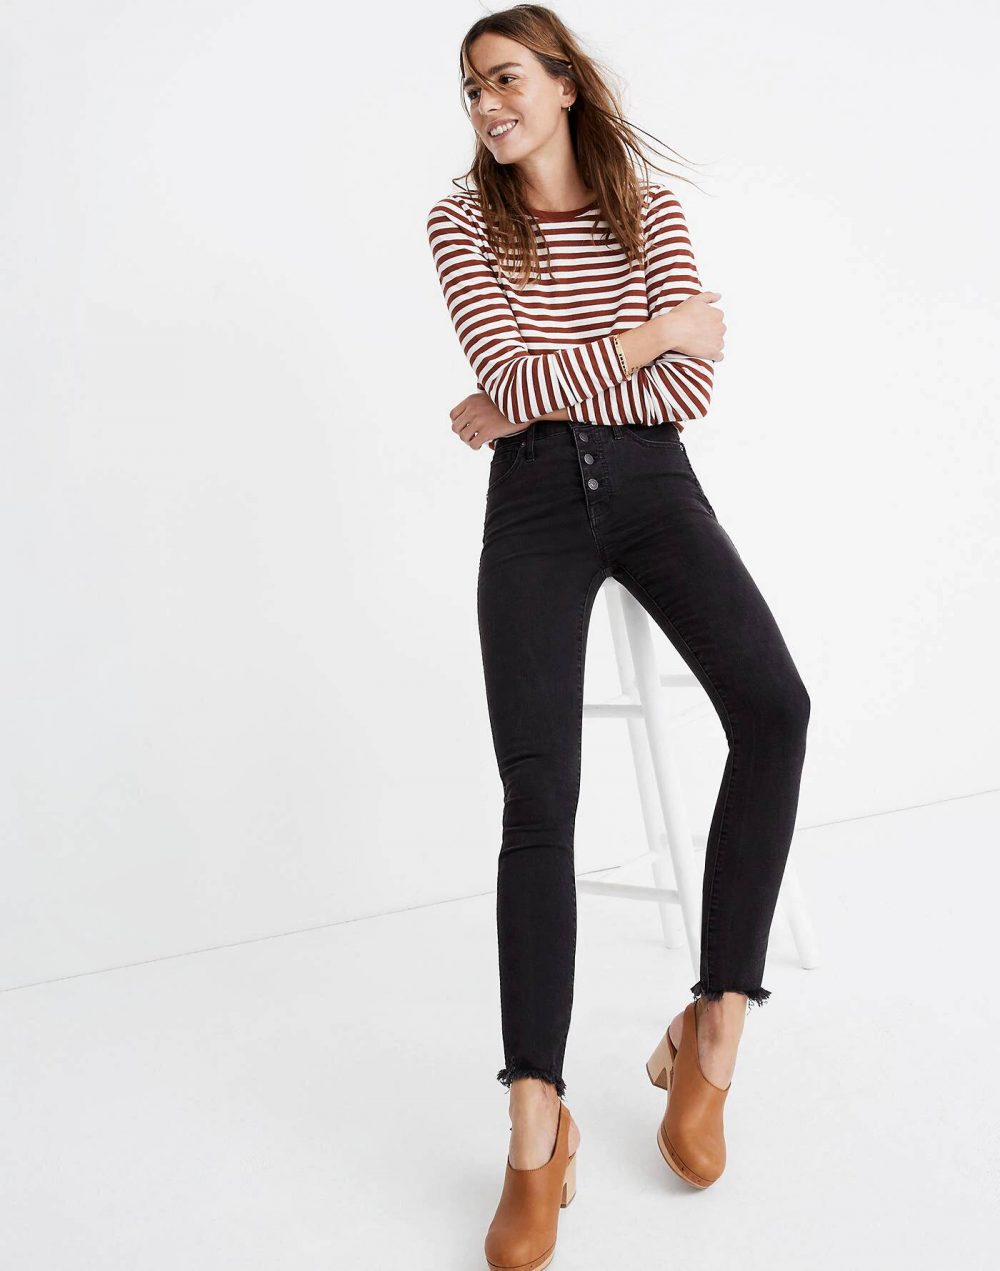 Madewell 10" High-Rise Skinny Jeans in Berkeley Black: Button-Through Edition